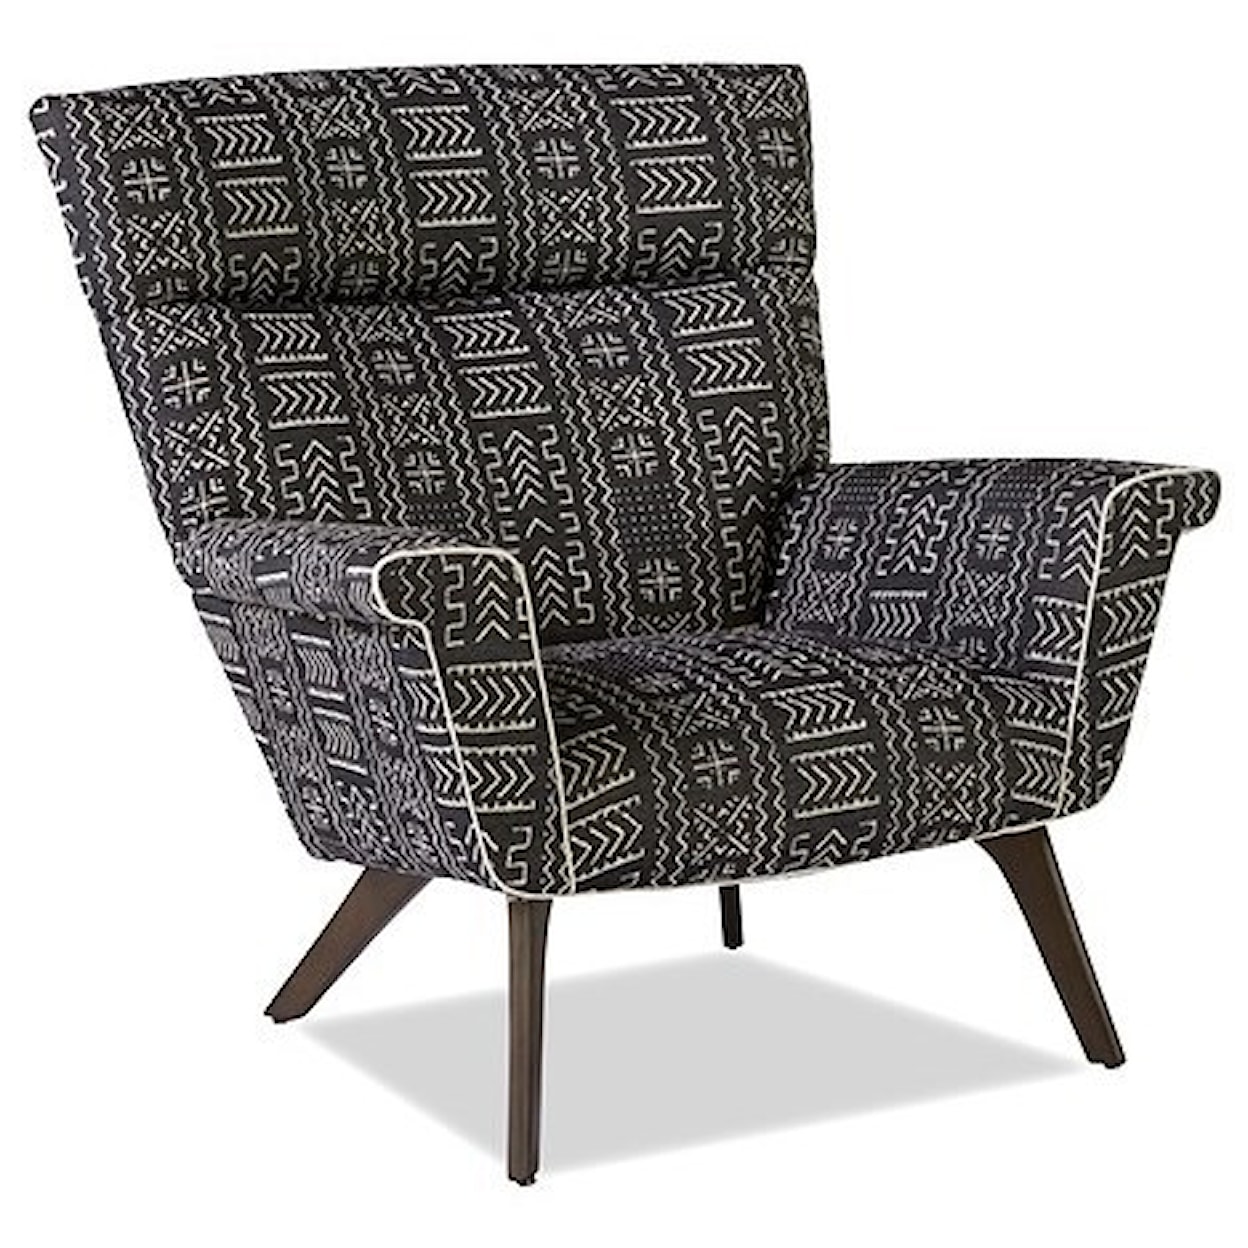 Huntington House Chairs Upholstered Accent Chair